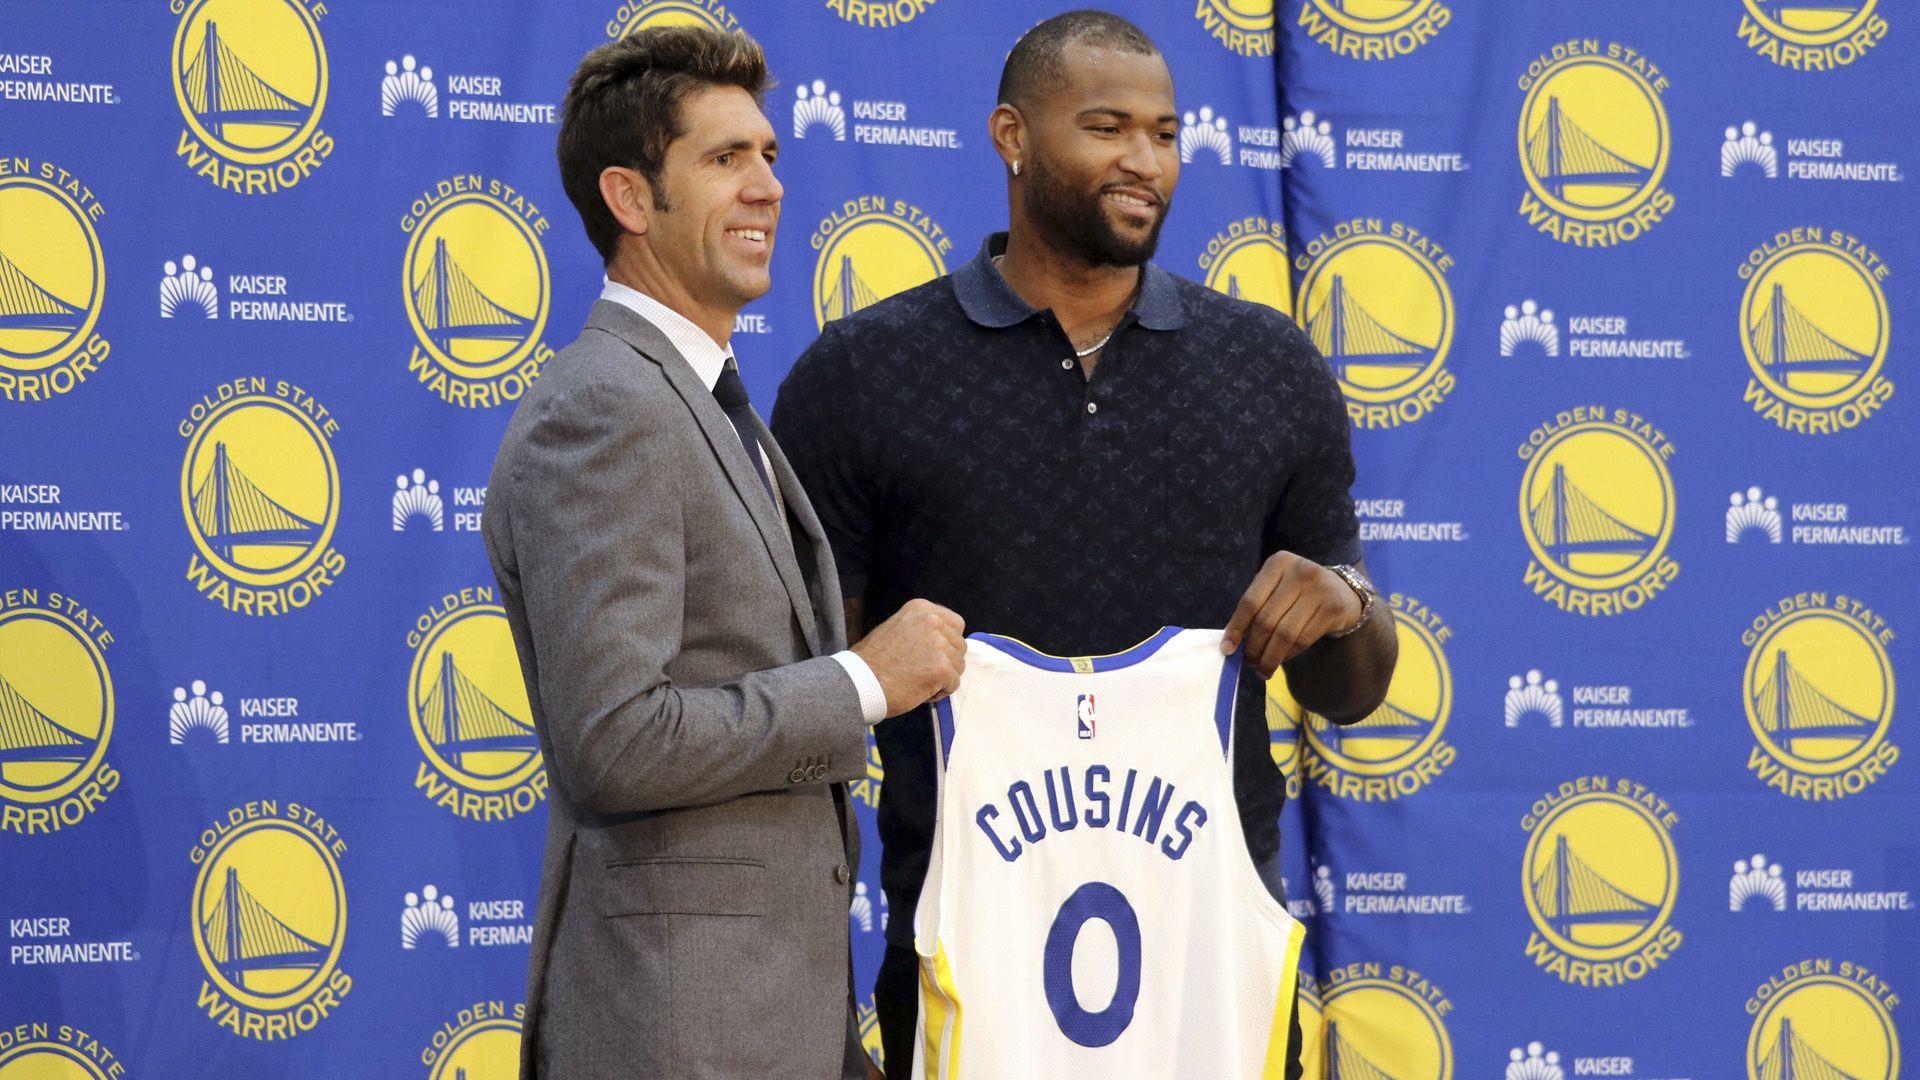 No winners or losers in DeMarcus Cousins' Warriors press conference